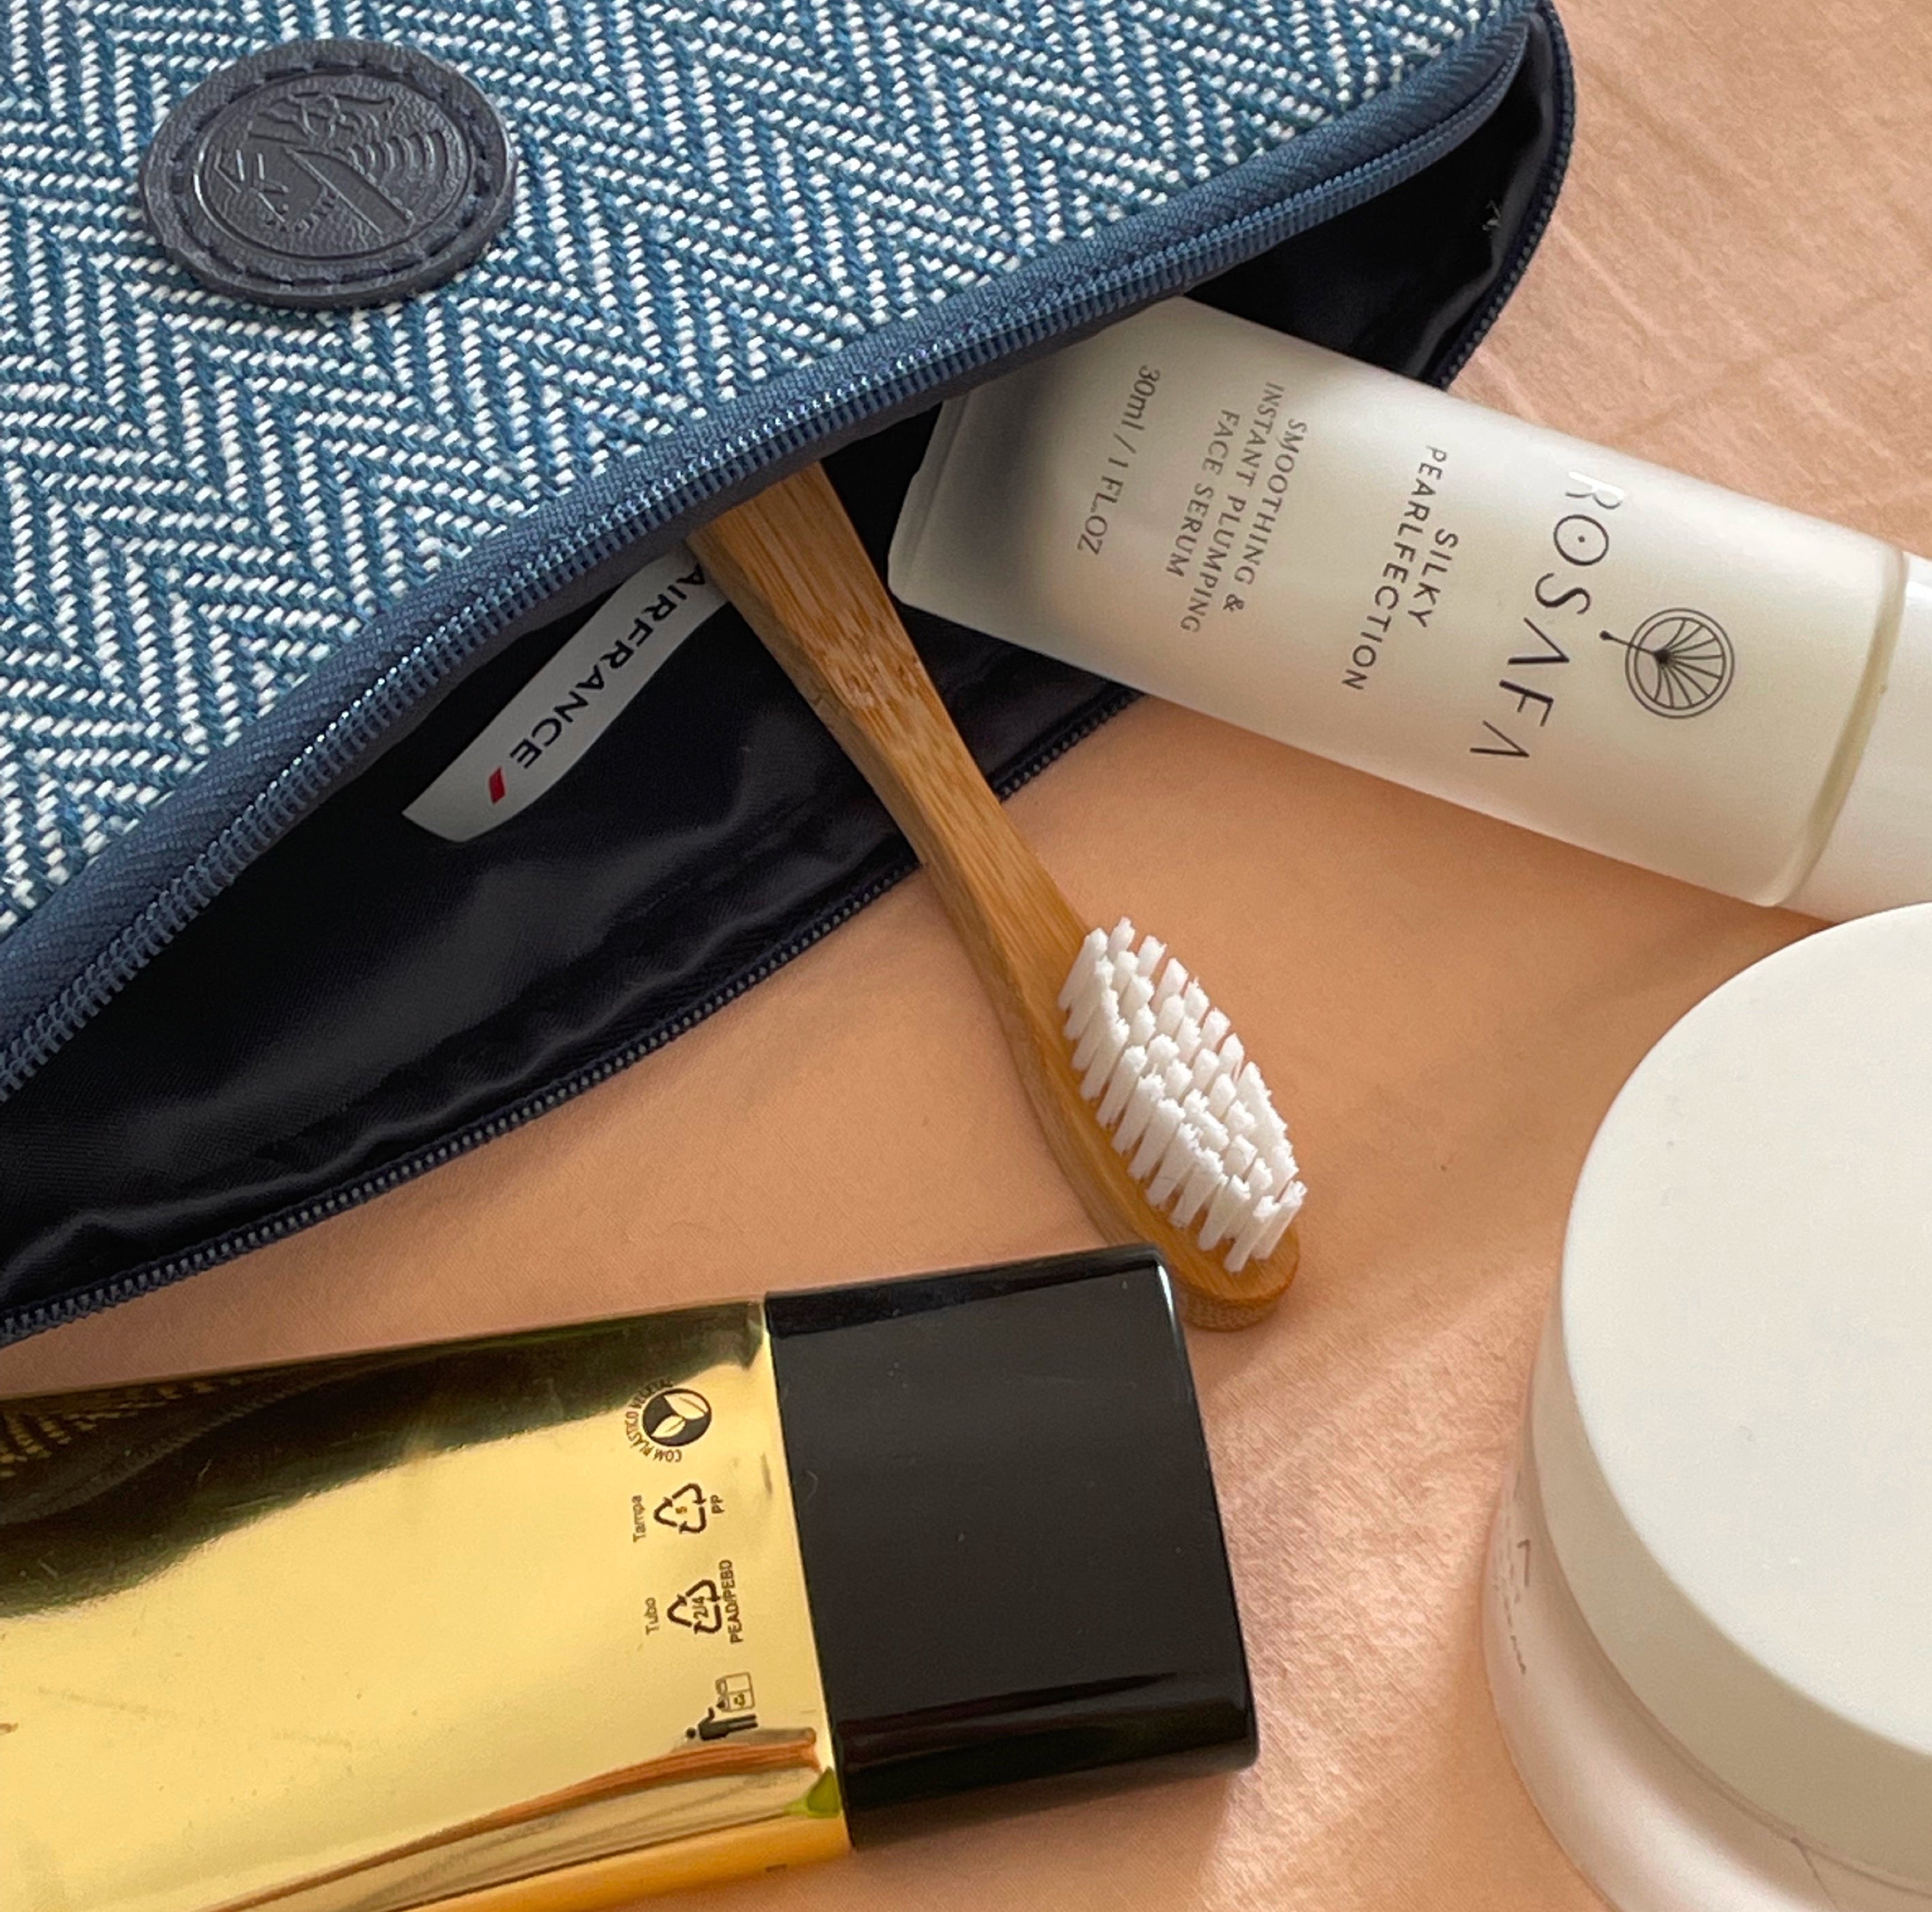 Rosafa face serum next to the toothbrush in a travel bag